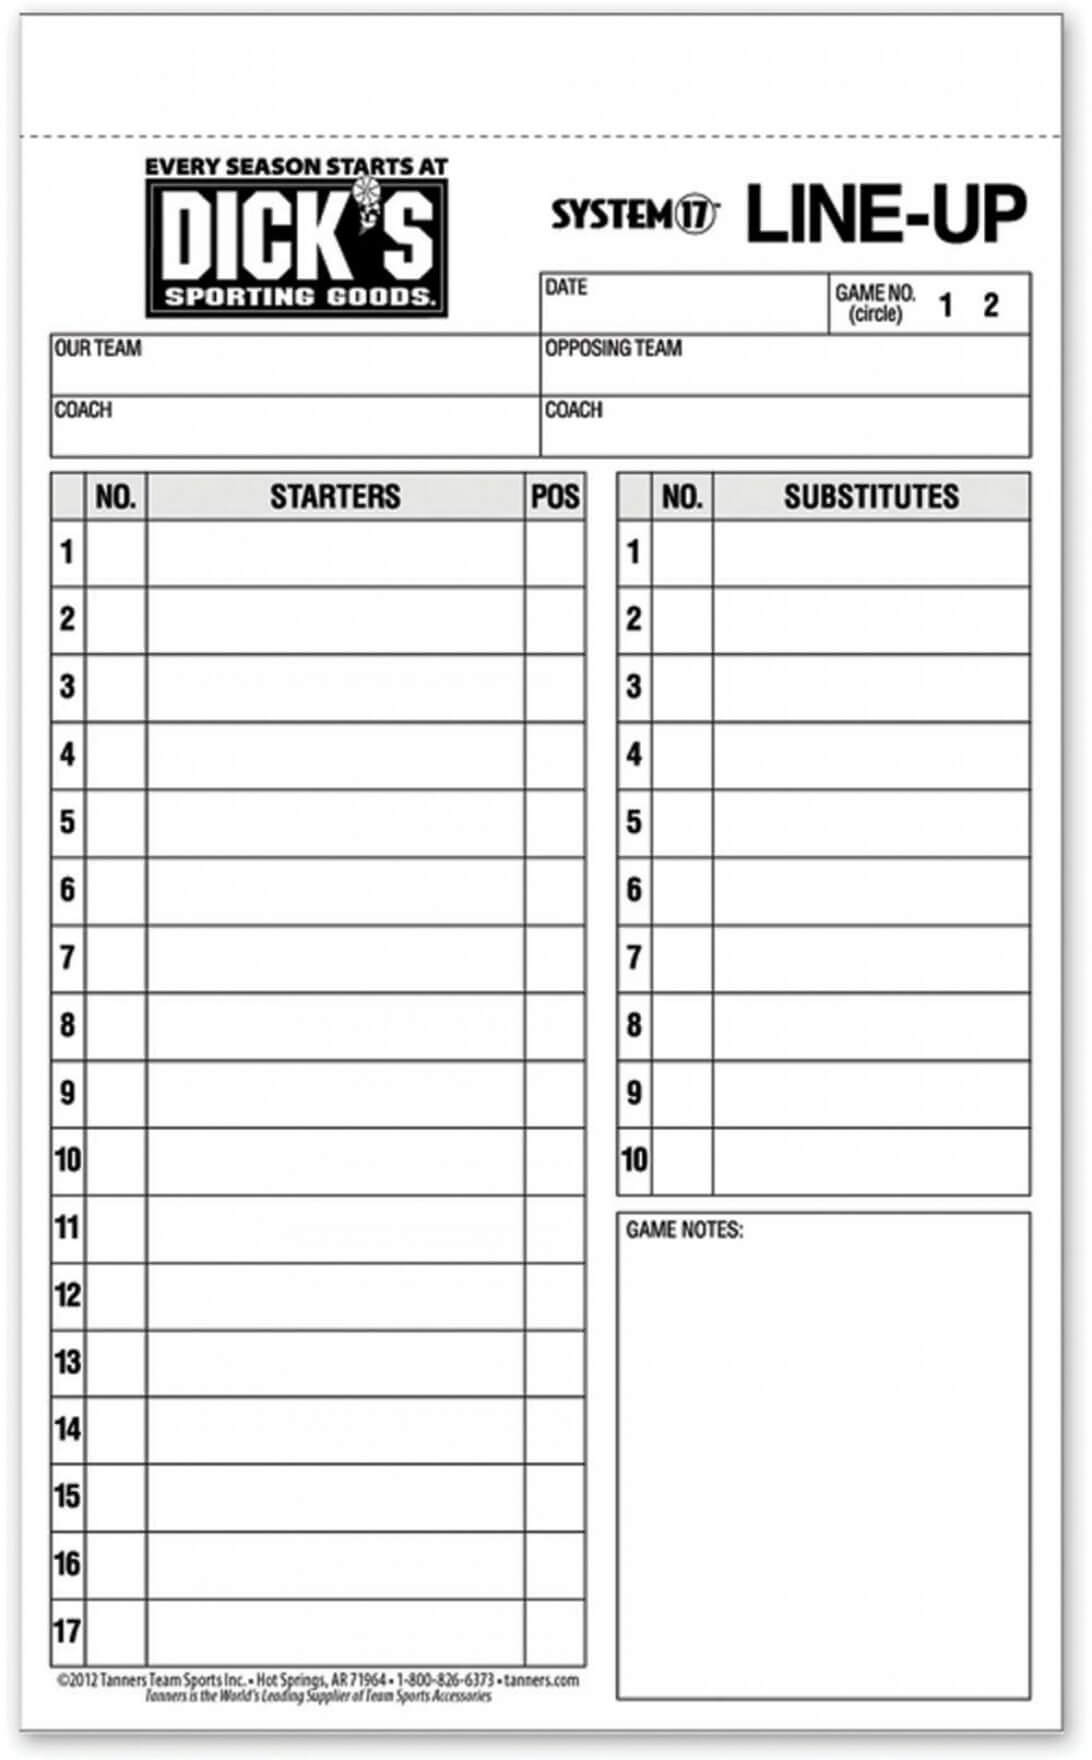 Baseball Lineup Template 023 Free Card Excel Frightening For Free Baseball Lineup Card Template